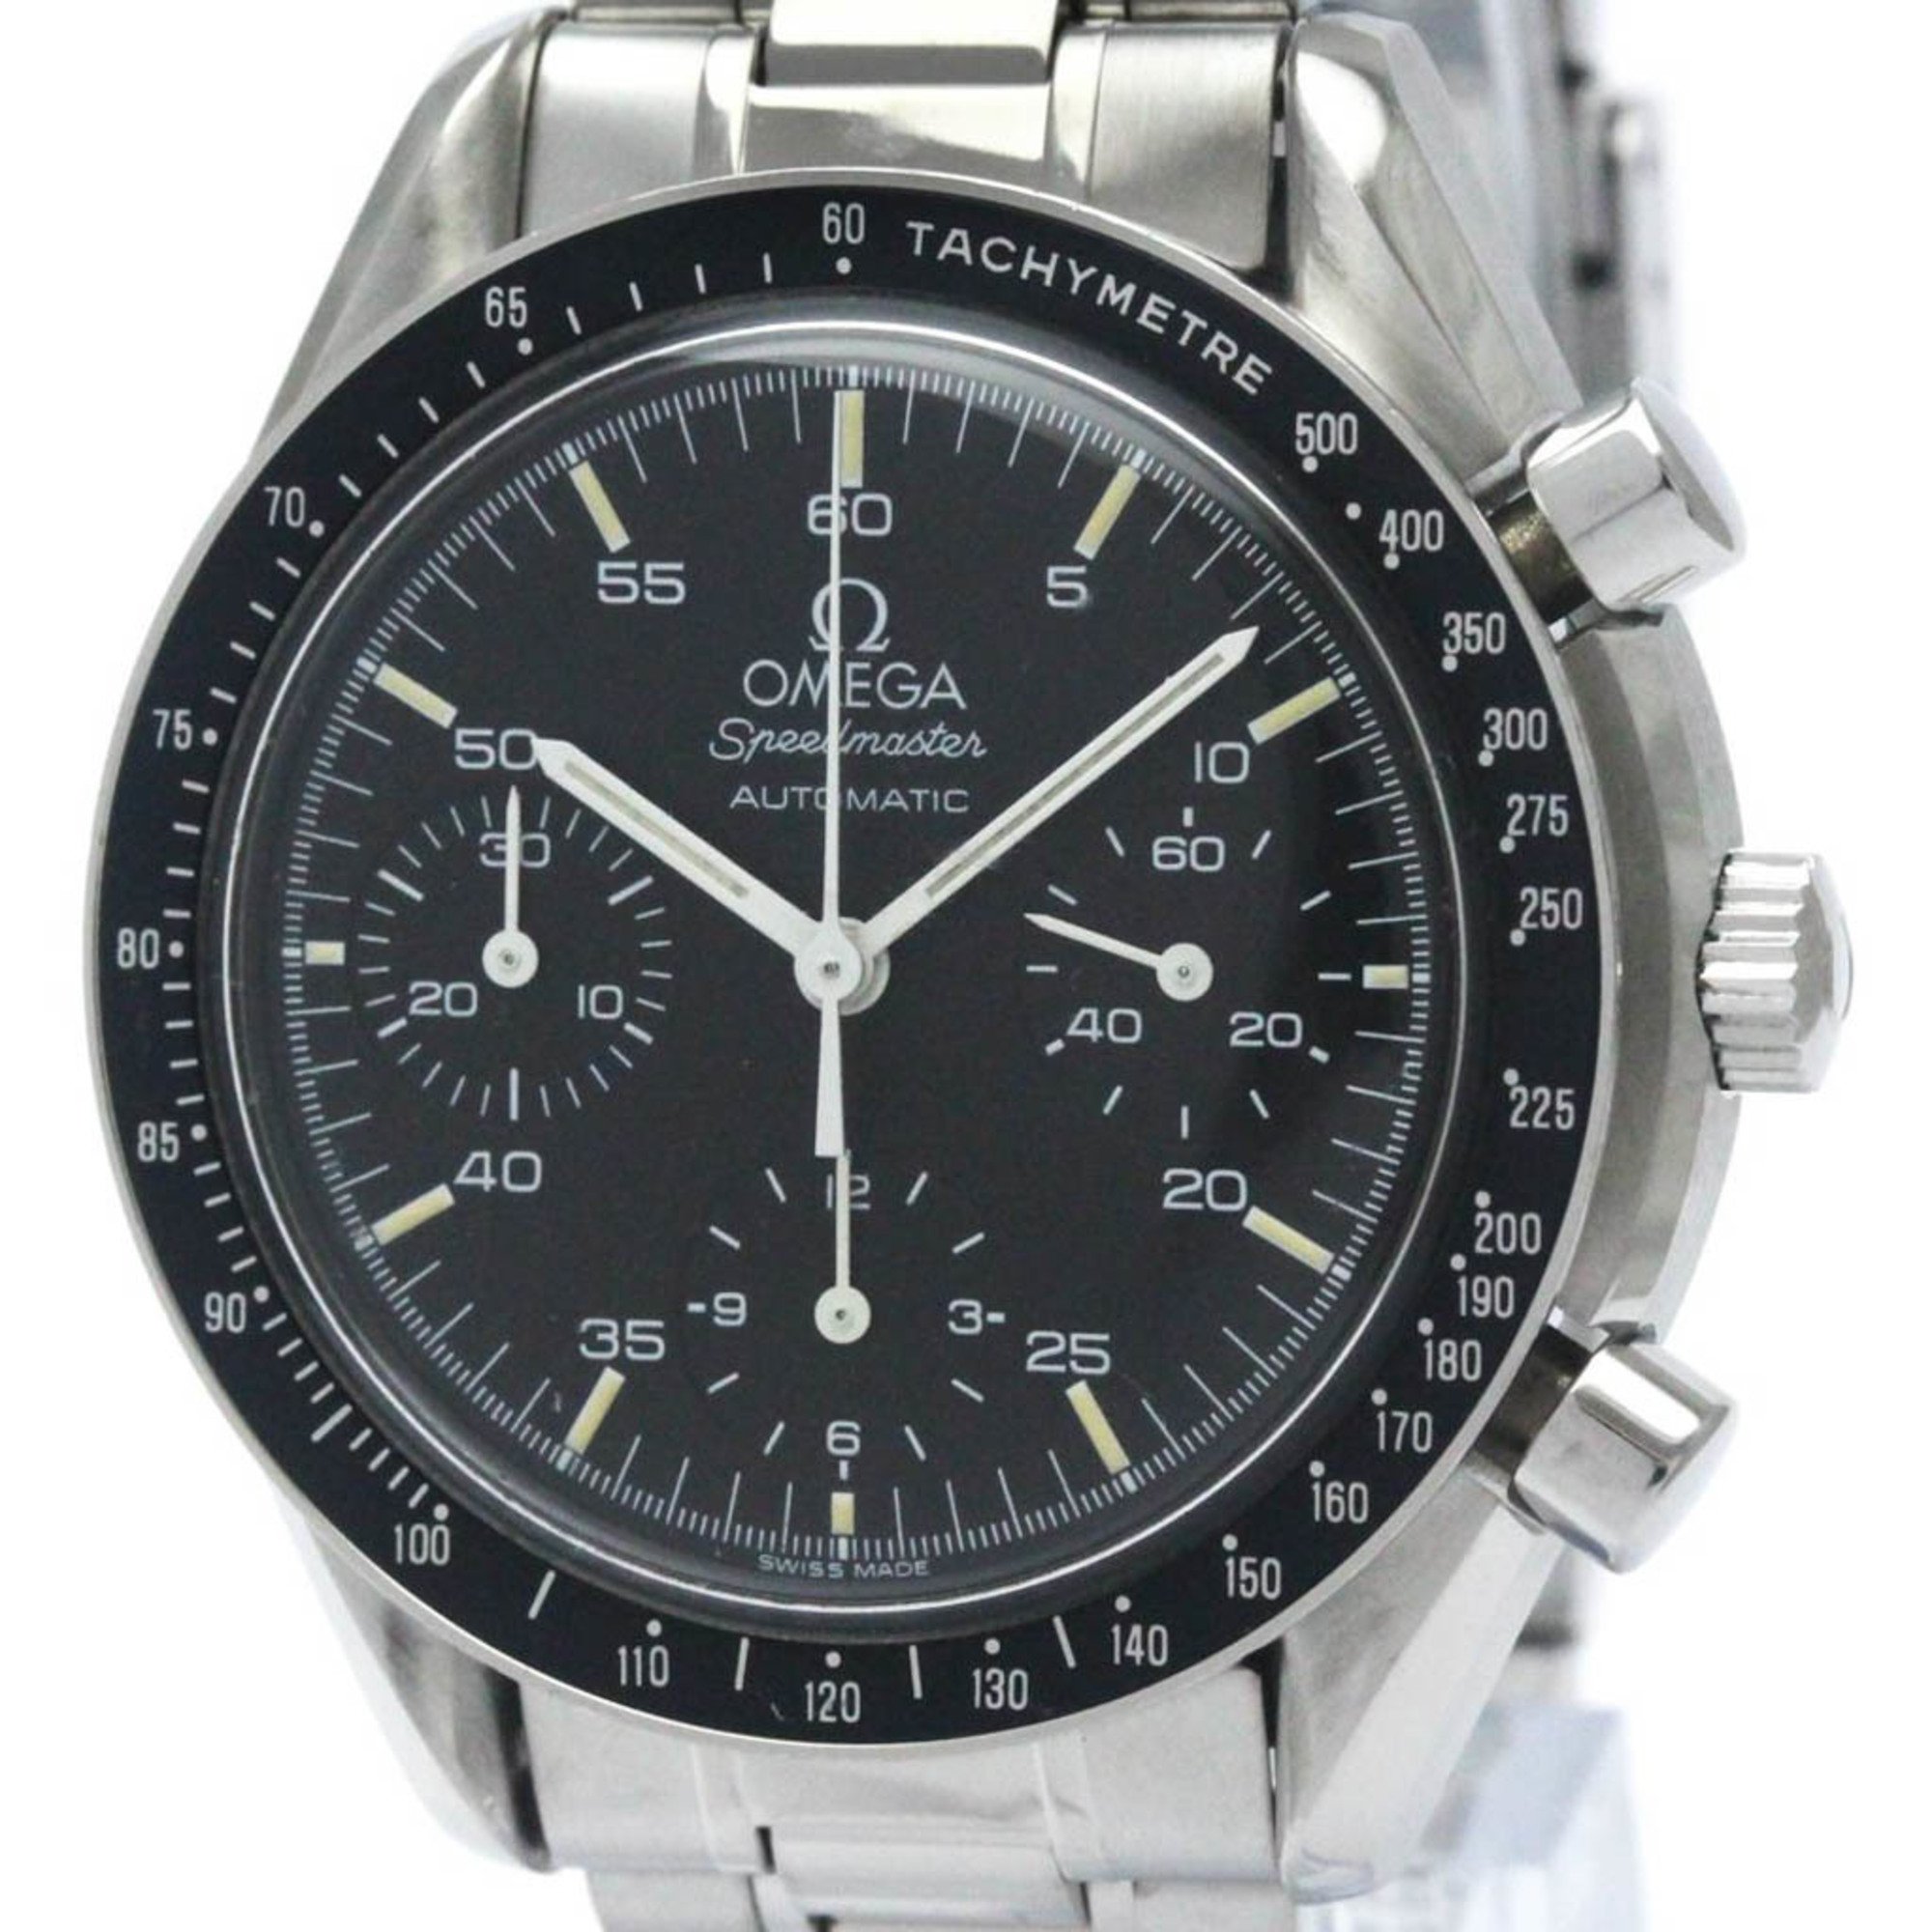 Polished OMEGA Speedmaster Automatic Steel Mens Watch 3510.50 BF566743